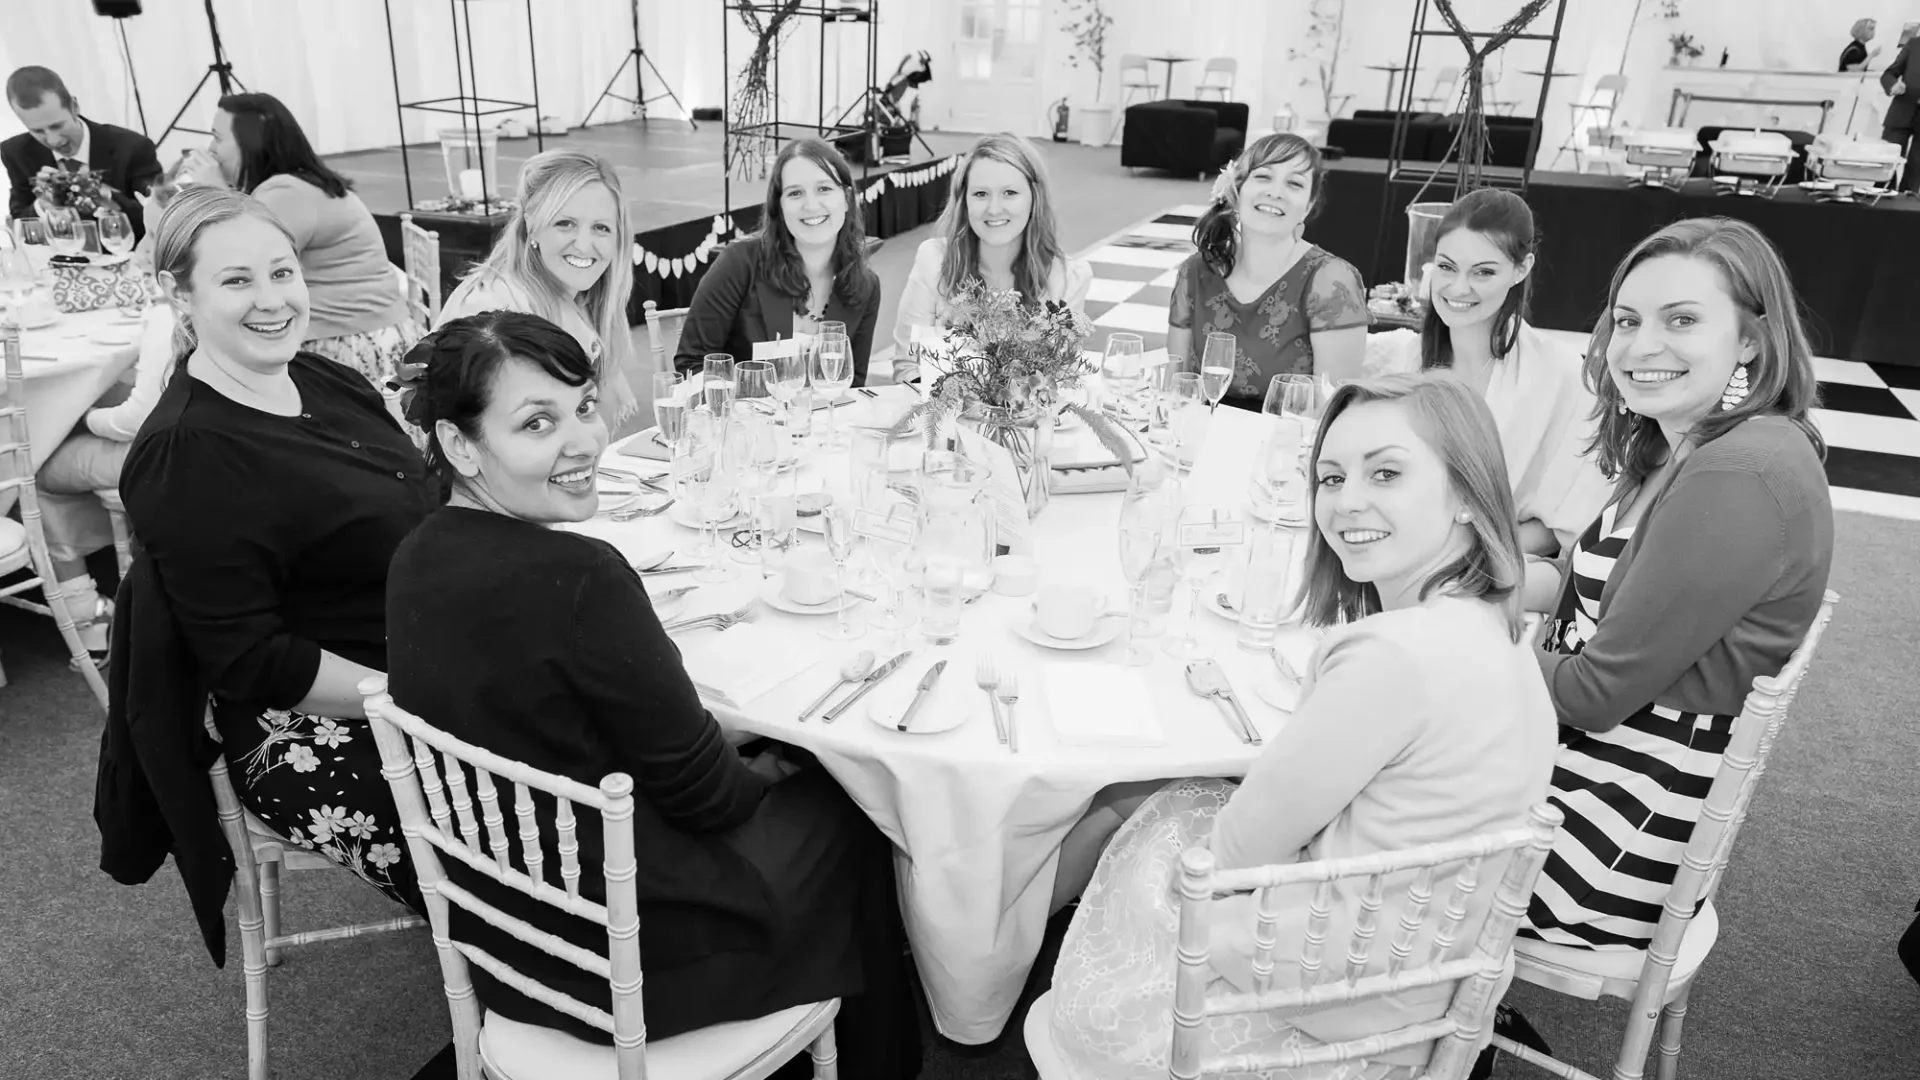 A group of nine women smiling at a formal dining event in a large tent, seated around a table set with dinnerware and glasses. the image is in black and white.